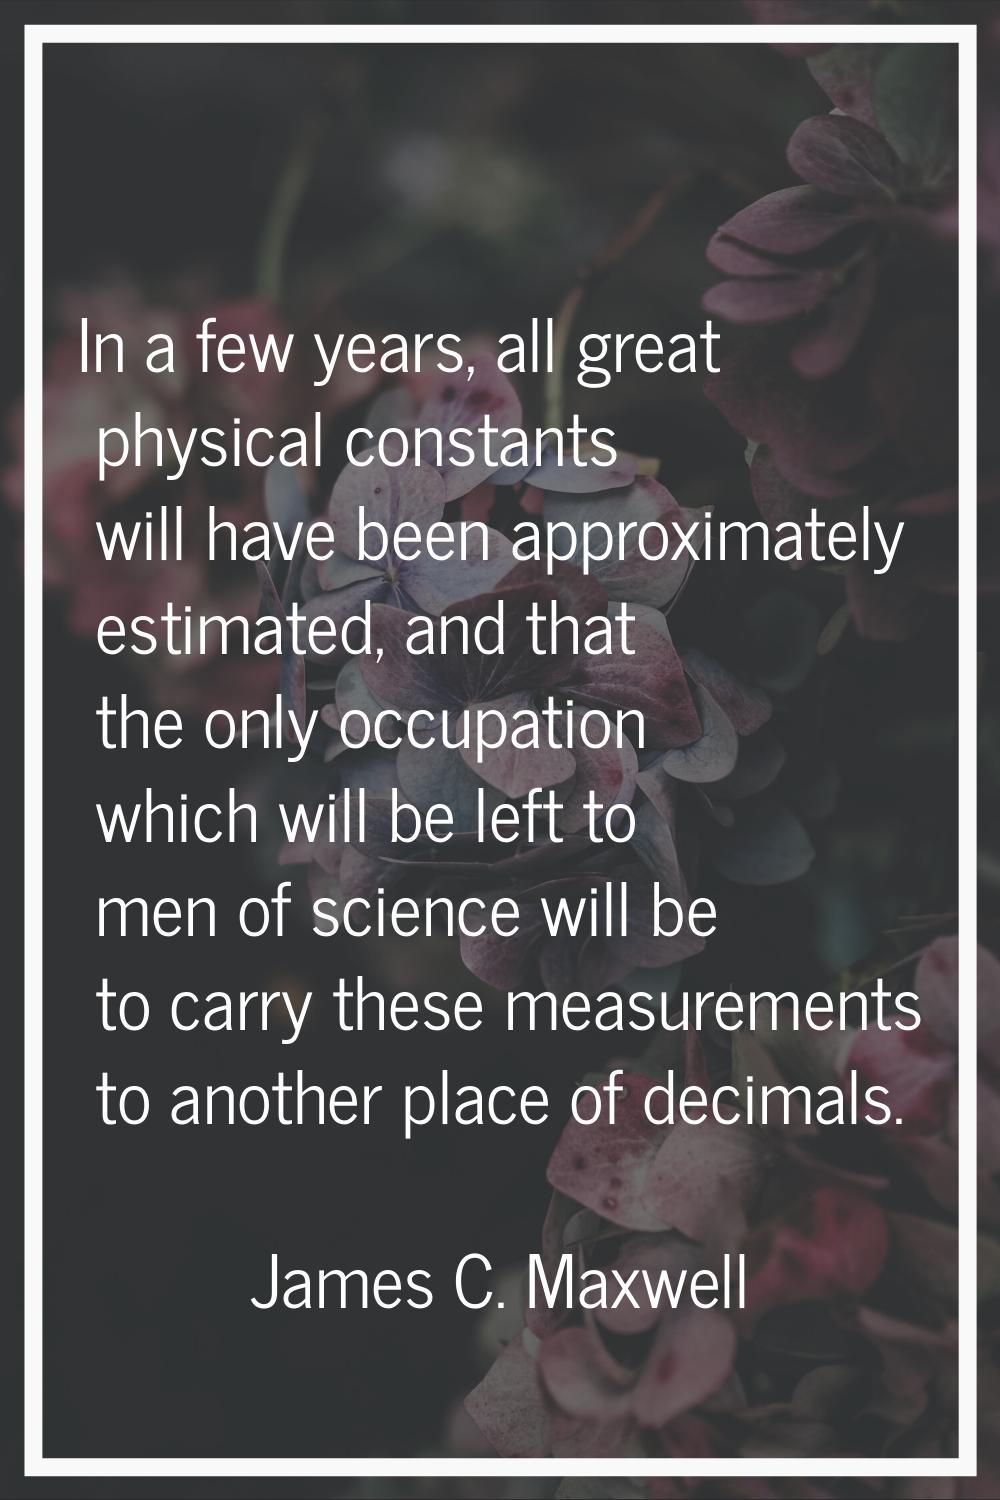 In a few years, all great physical constants will have been approximately estimated, and that the o